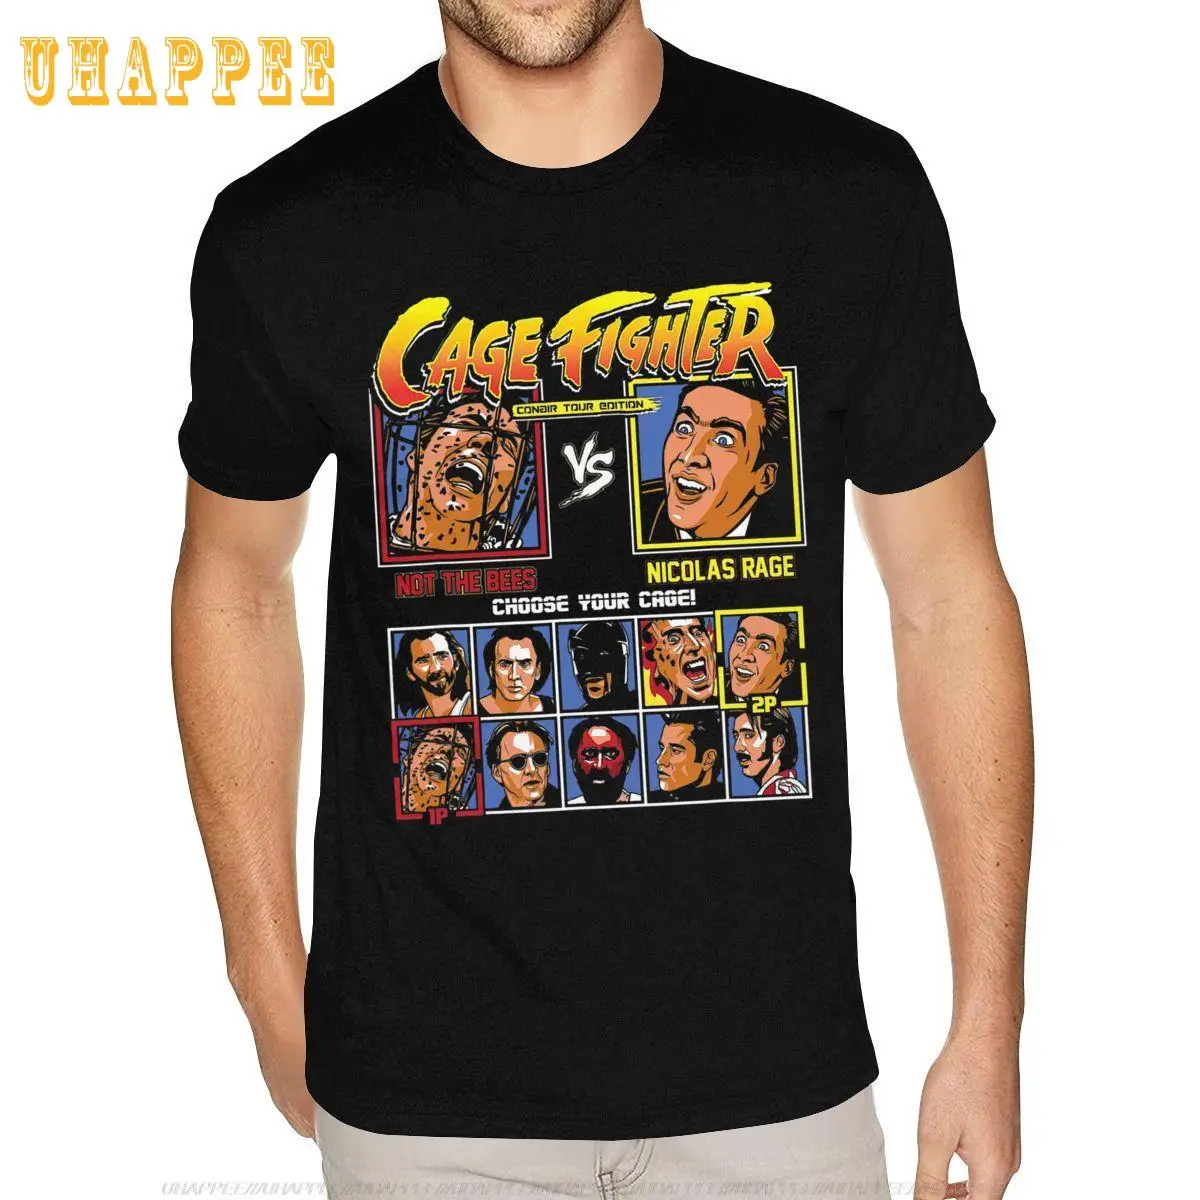 

Extra Large Cage Fighter Not The Bees Vs Nicolas Rage Choose Your Cage Tees Shirts Homme Basic Style Custom Short Sleeve T shirt